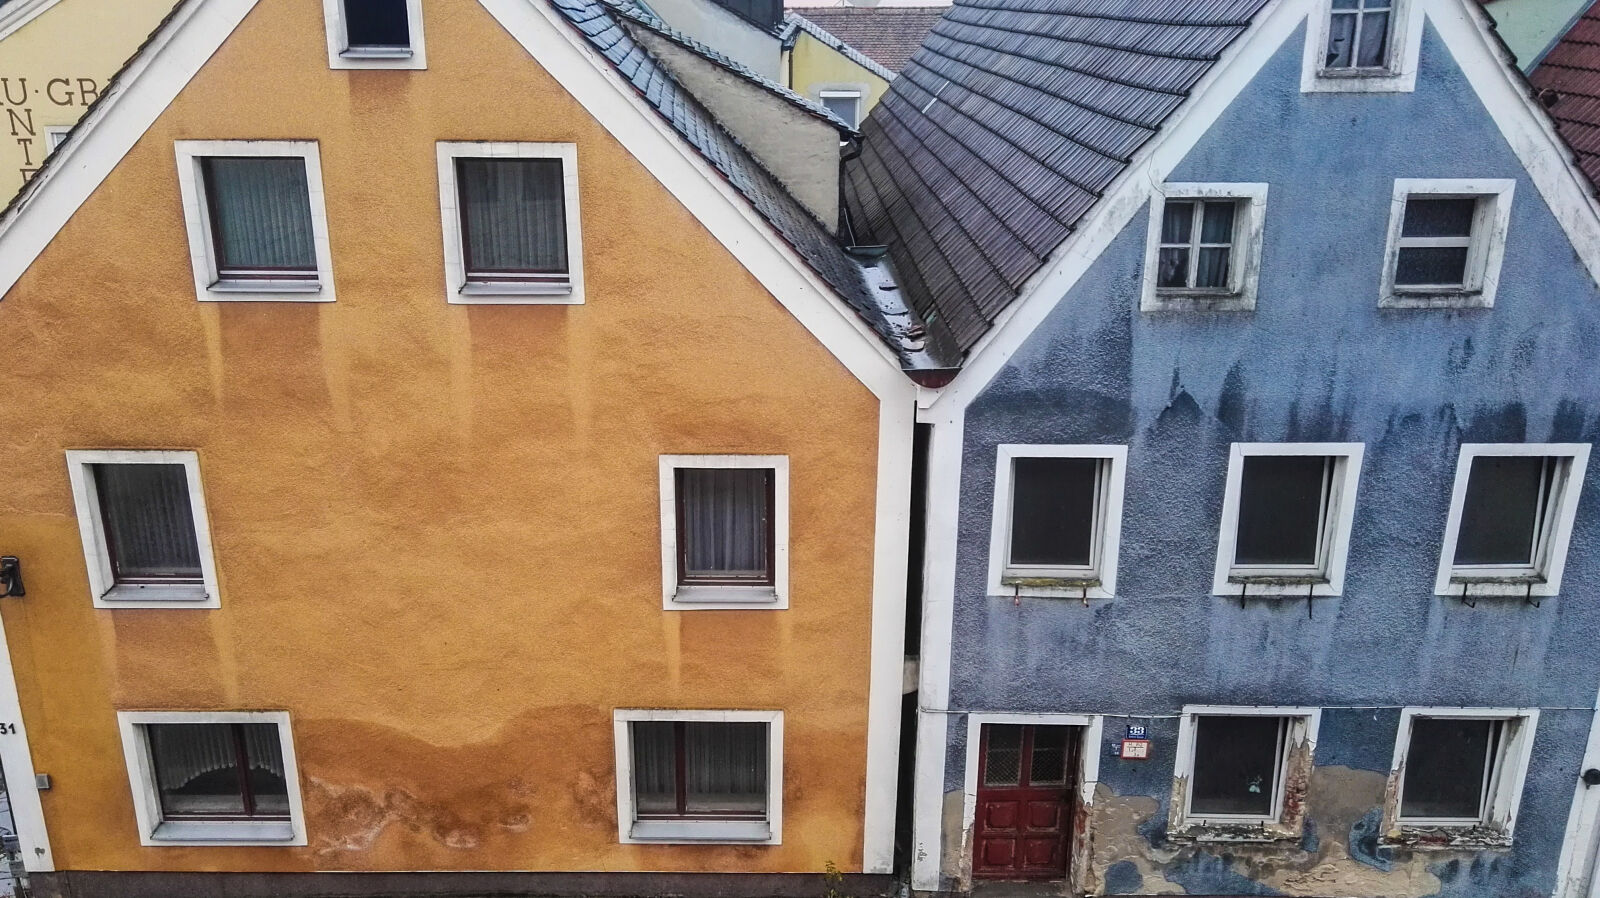 HUAWEI P8 sample photo. Buildings, colorful, homes, old photography